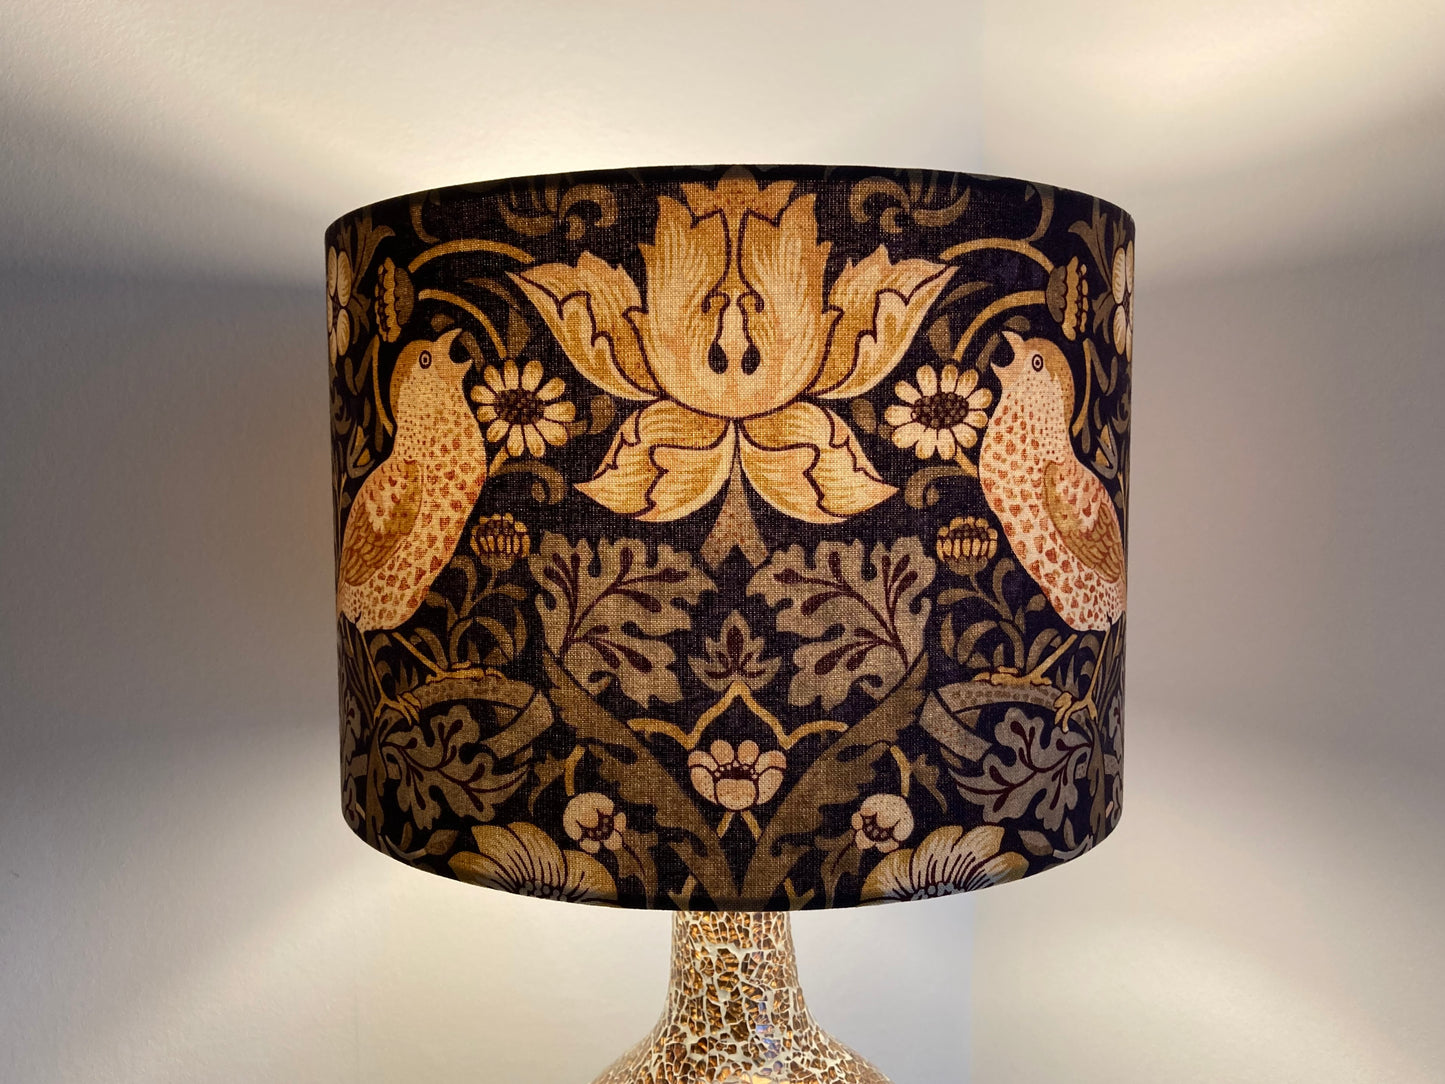 William Morris Strawberry Thief Grape and Gold Fabric Lampshade for Table or Ceiling Lamps